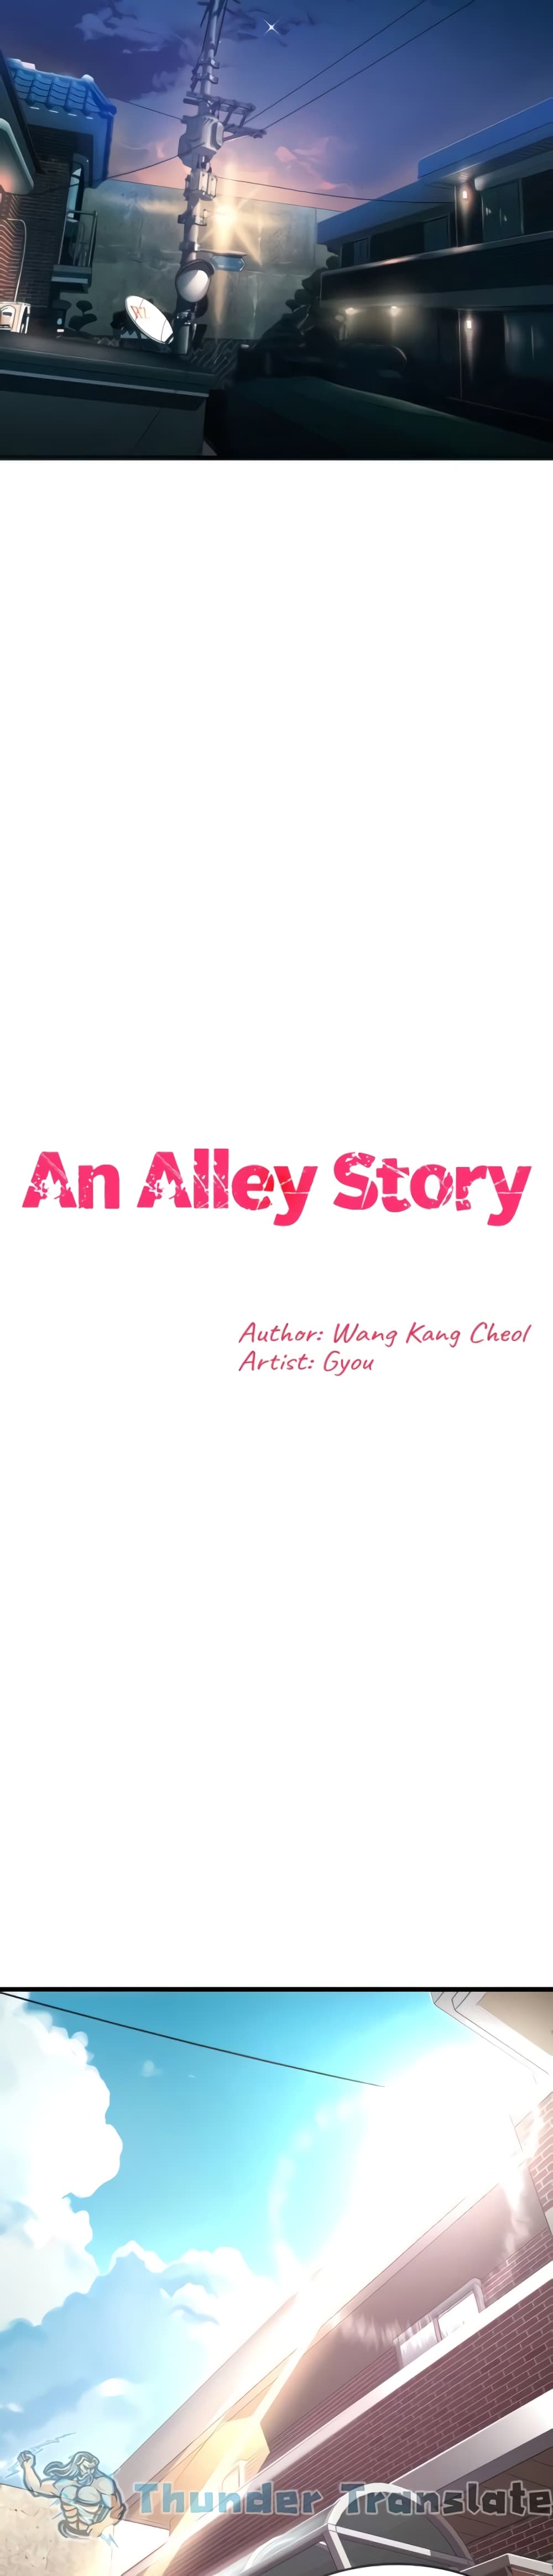 An Alley story 6-6